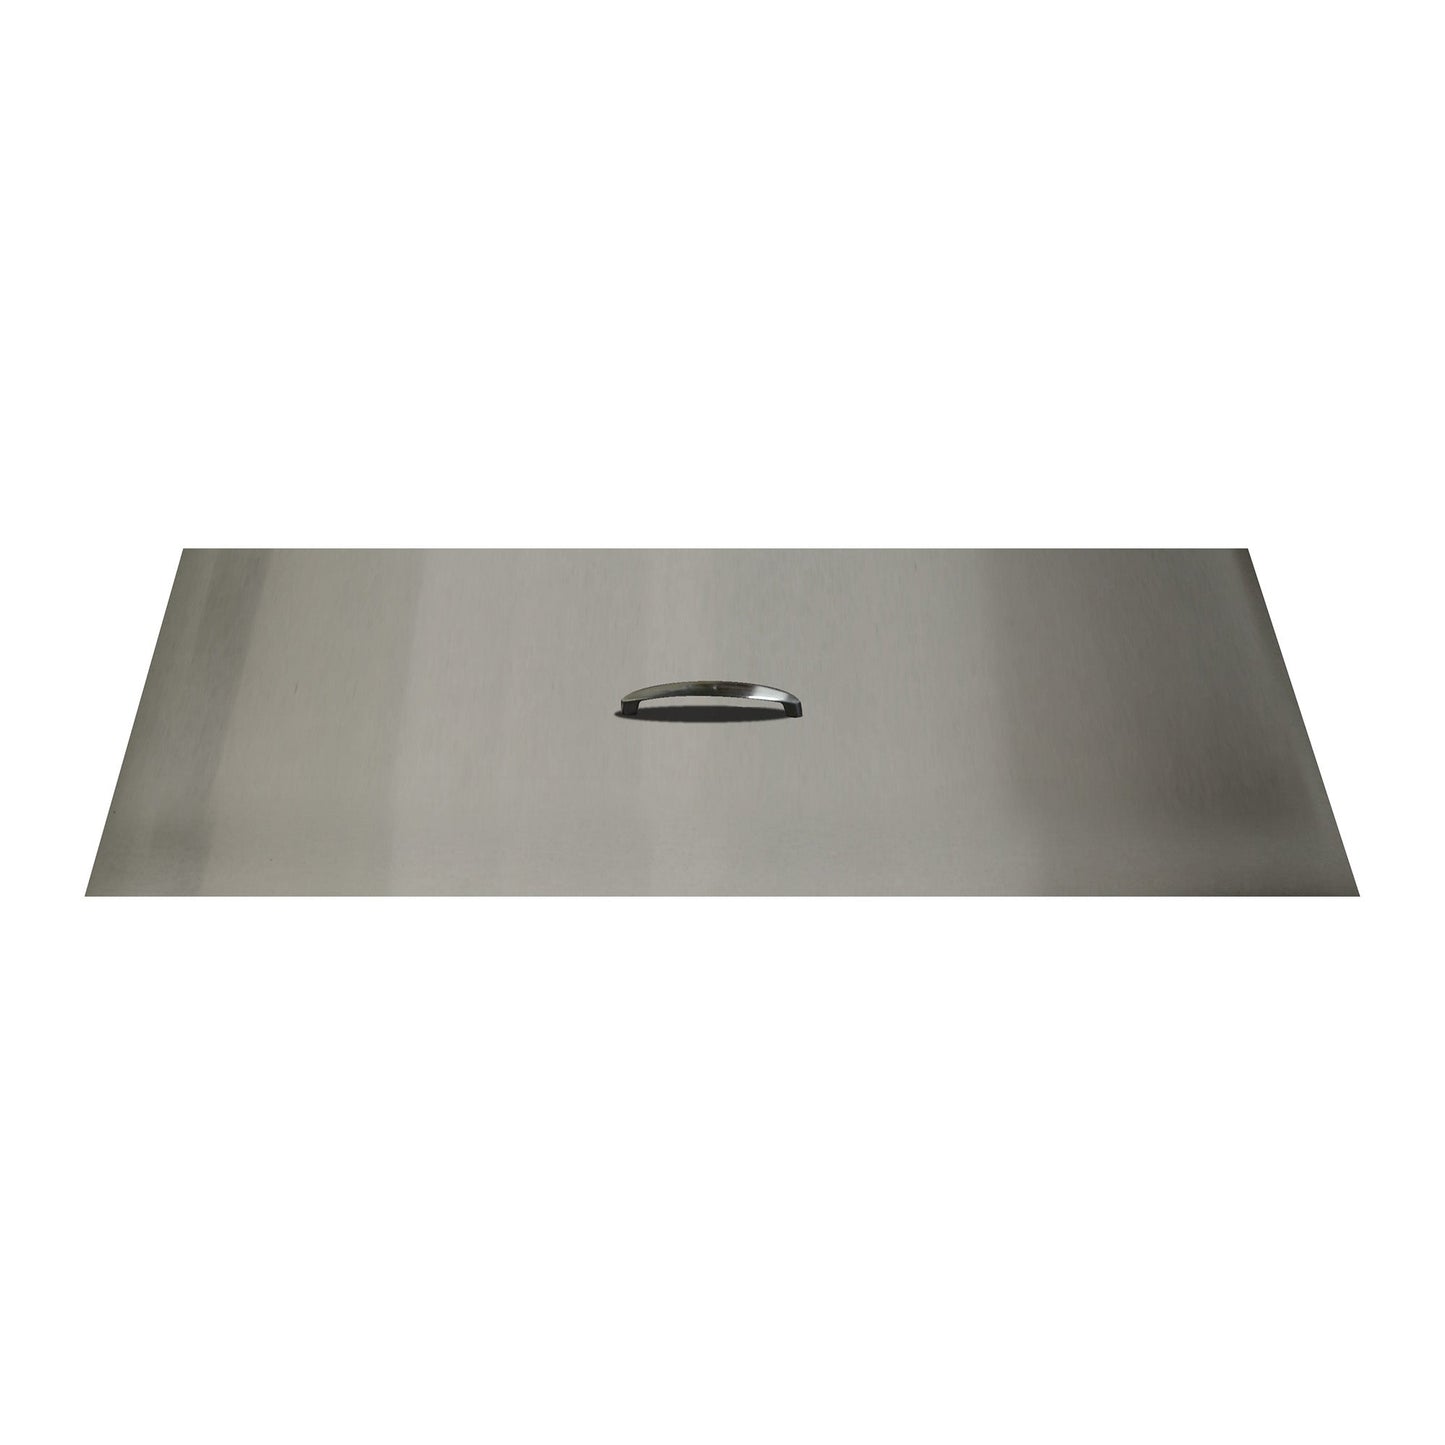 The Outdoor Plus 25" x 21" Stainless Steel Rectangular Fire Pit Lid Cover